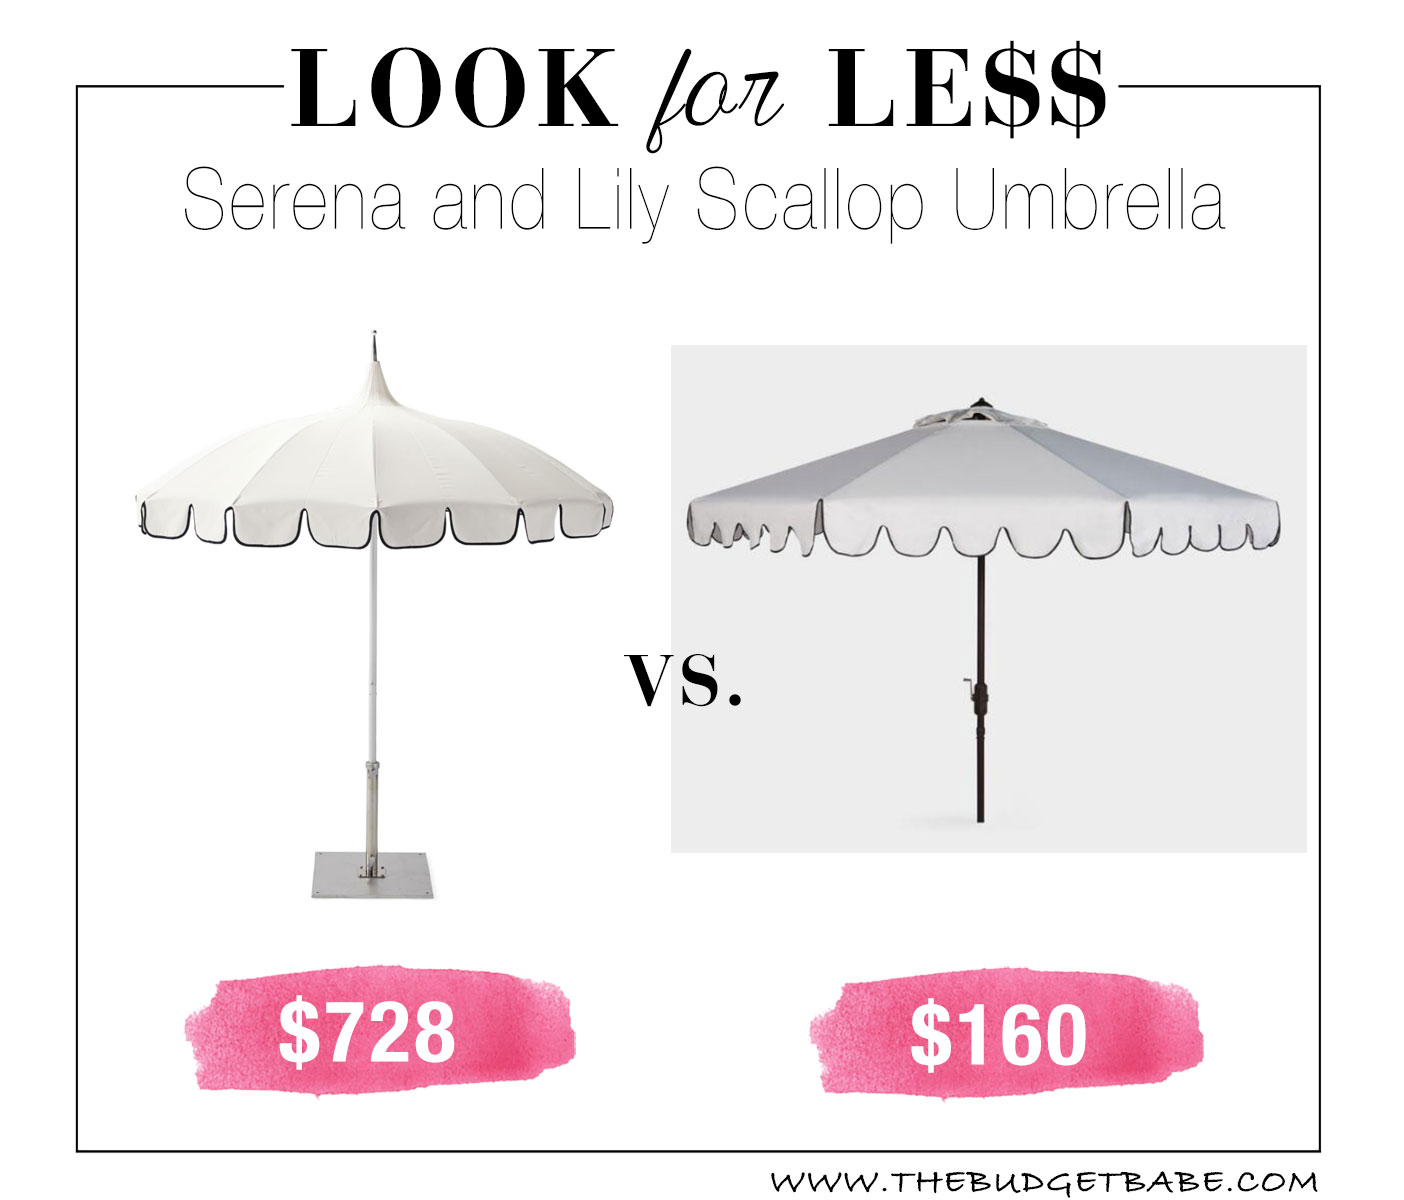 Serena & Lily dupe! Great time to get it during their spring sale